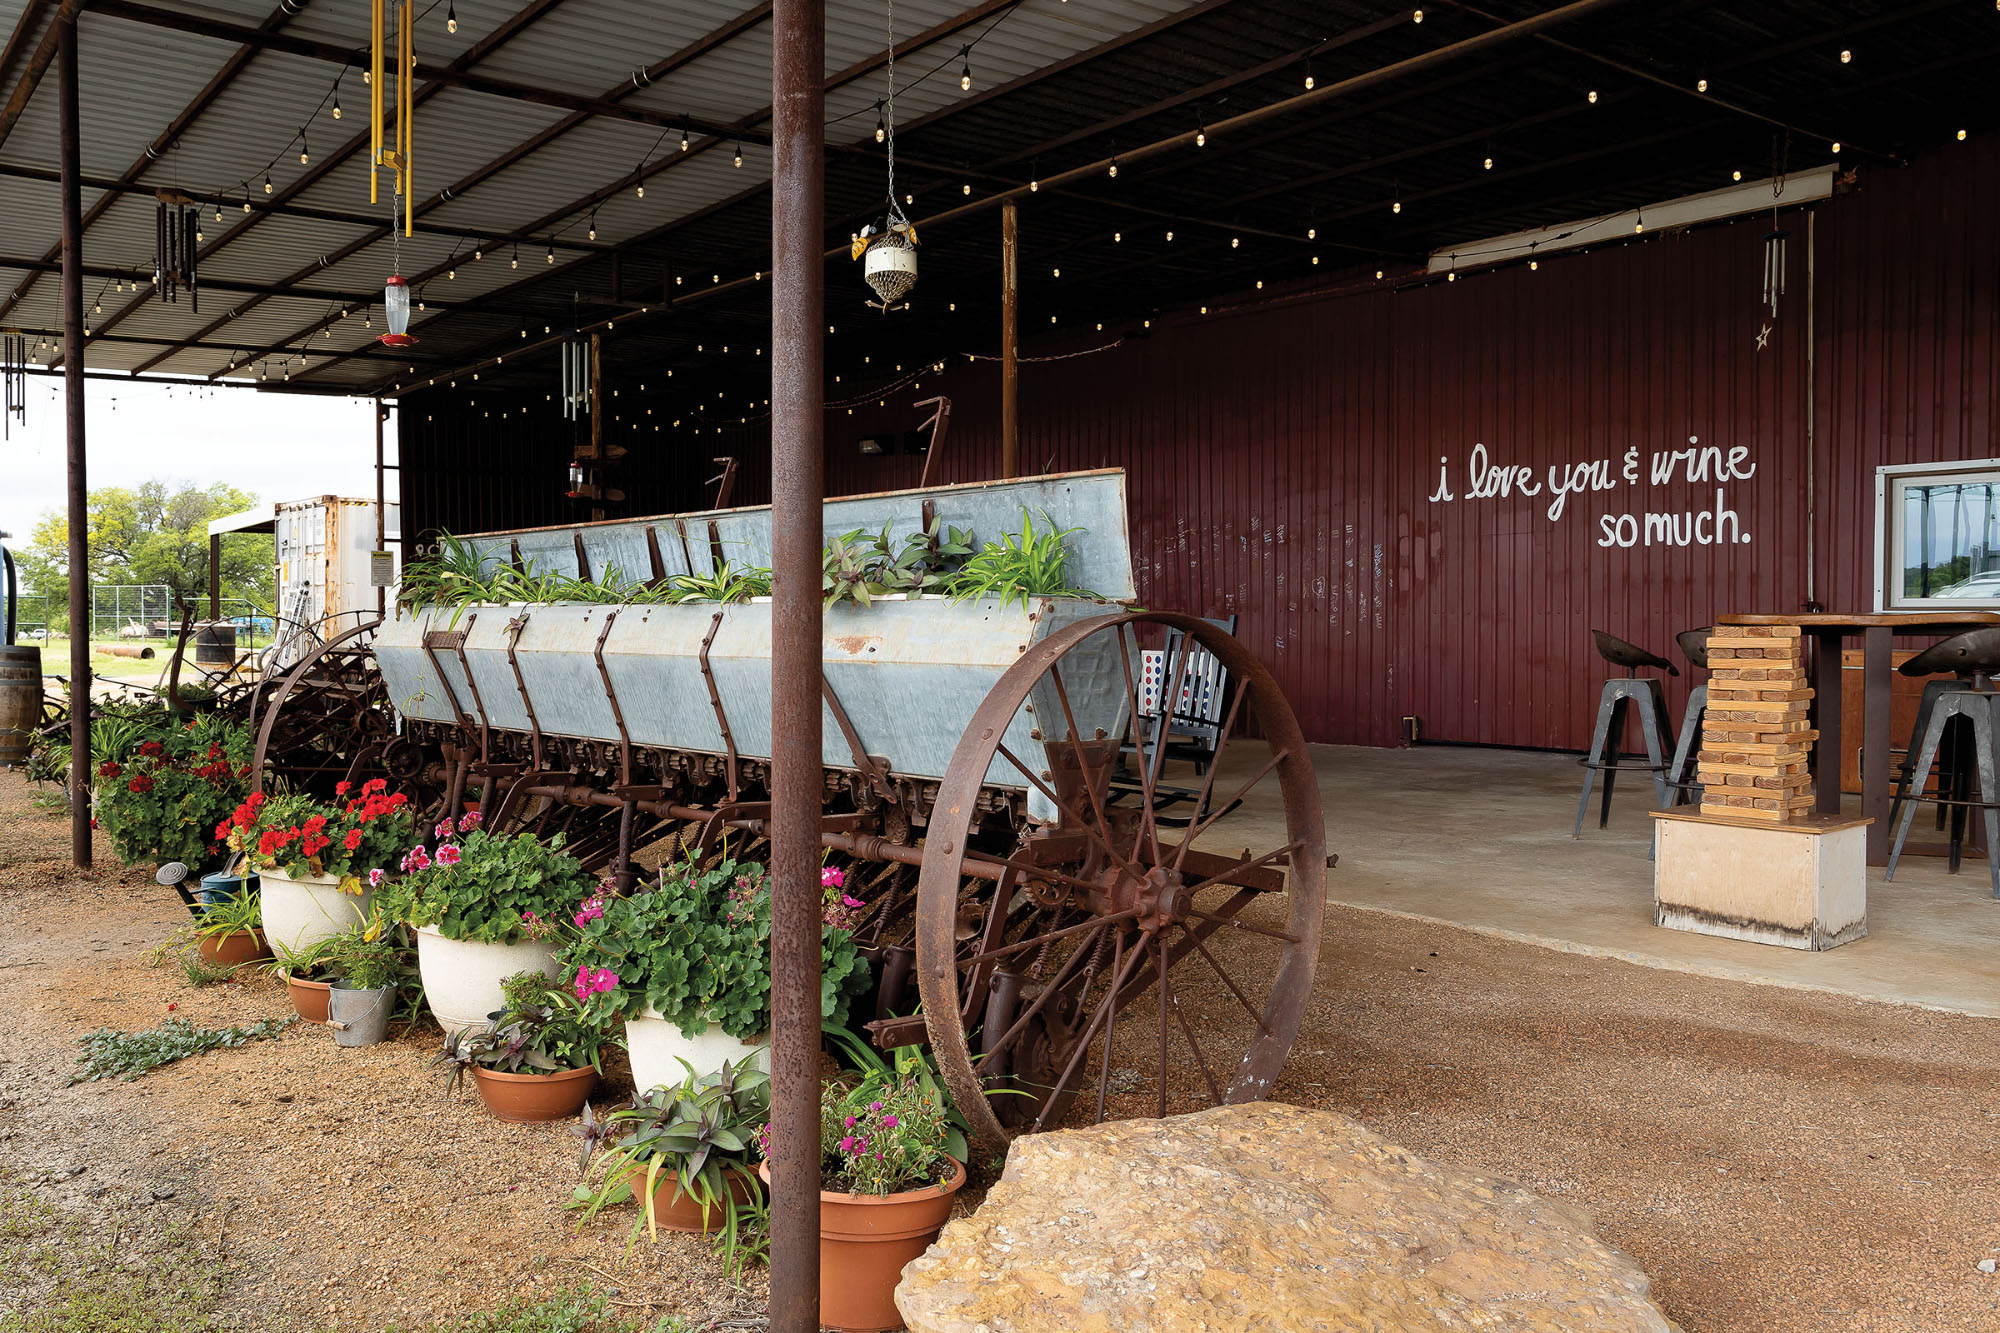 Rustic digs at a winery featuring a mural saying "I Love Wine So Much"